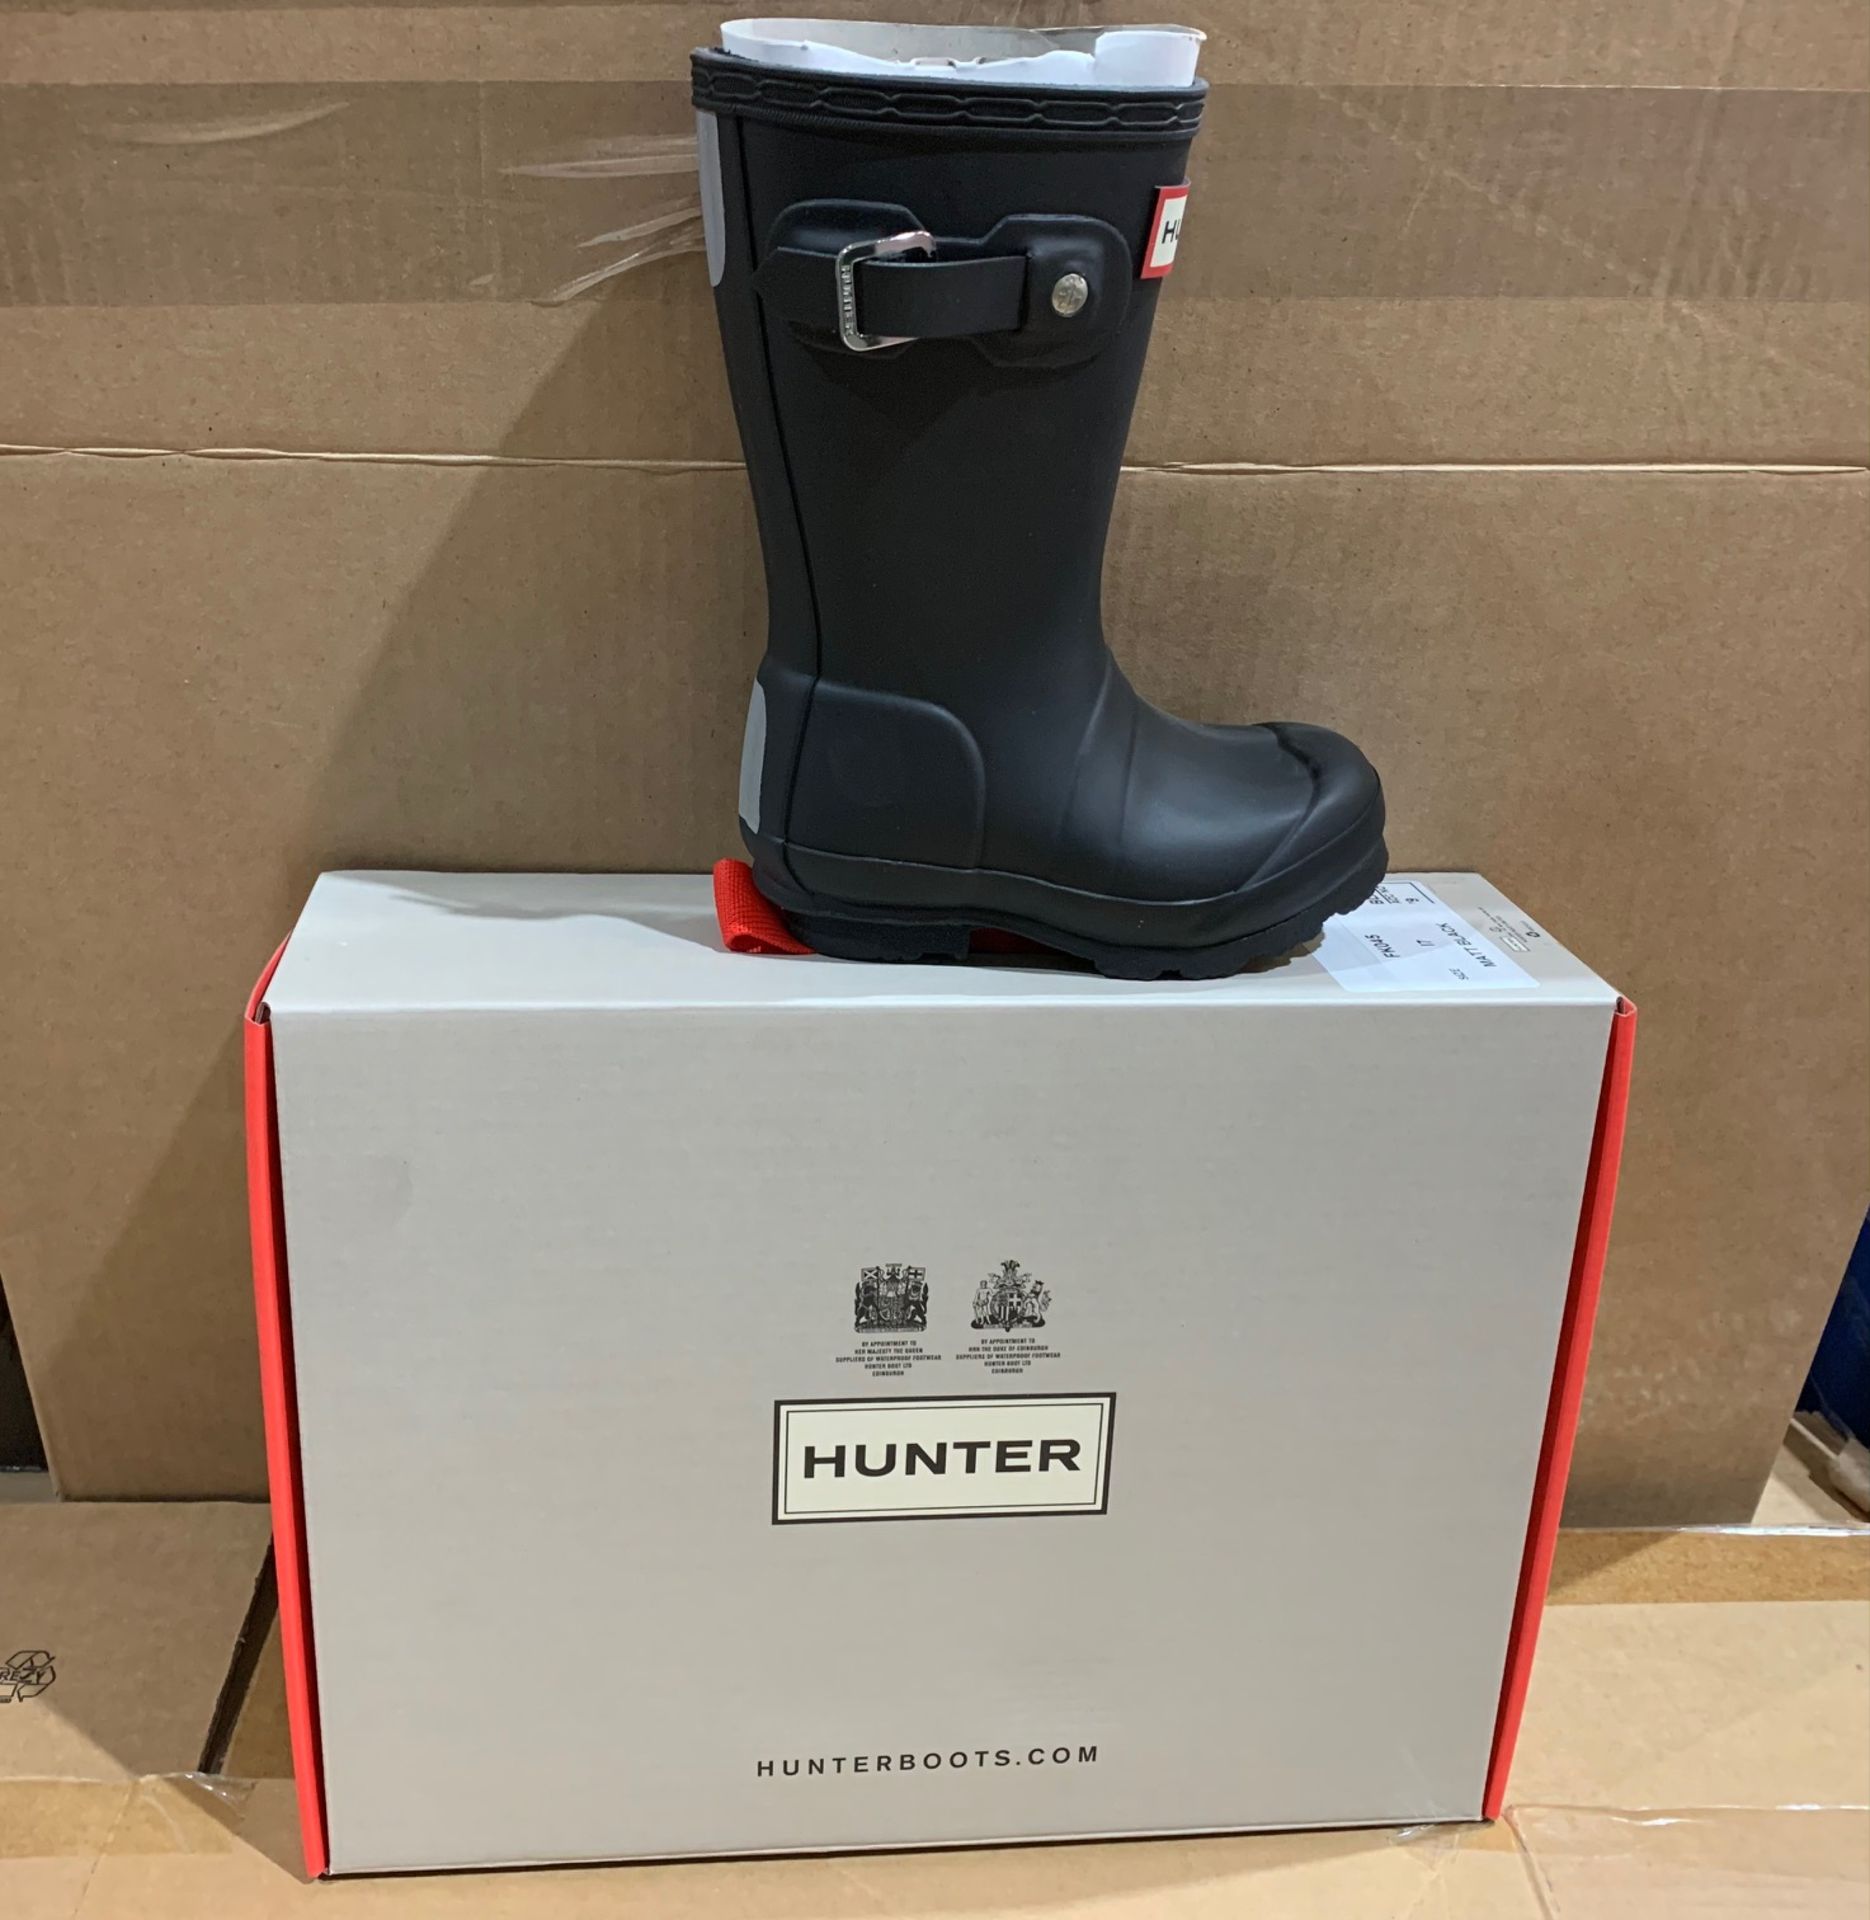 1 X NEW & BOXED HUNTER BOOTS SIZE INFANT 7